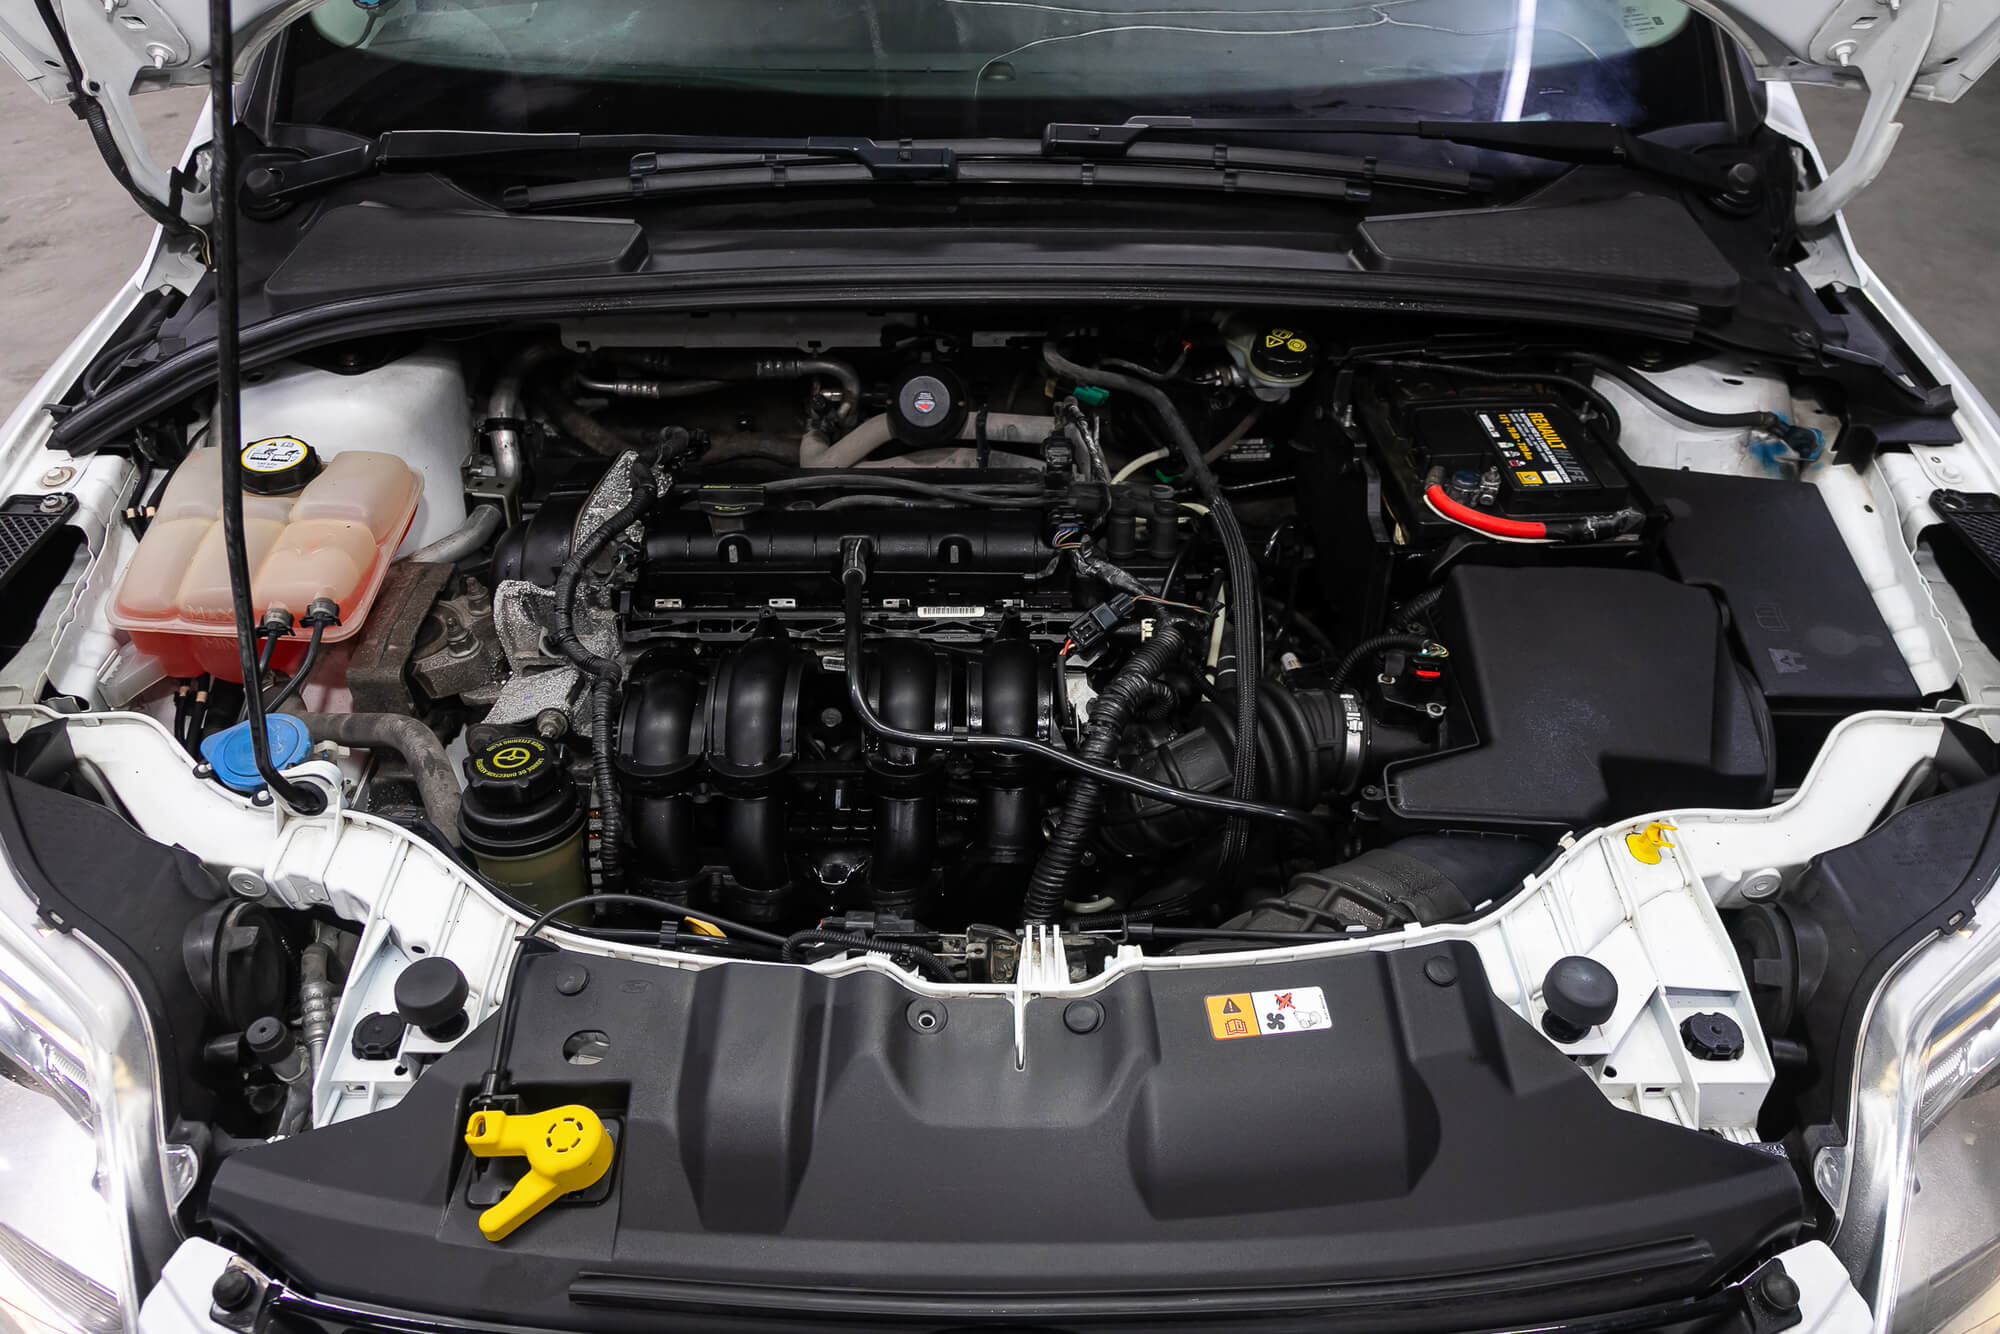 A Guide To 2014 Ford Focus Transmission Replacement Cost!